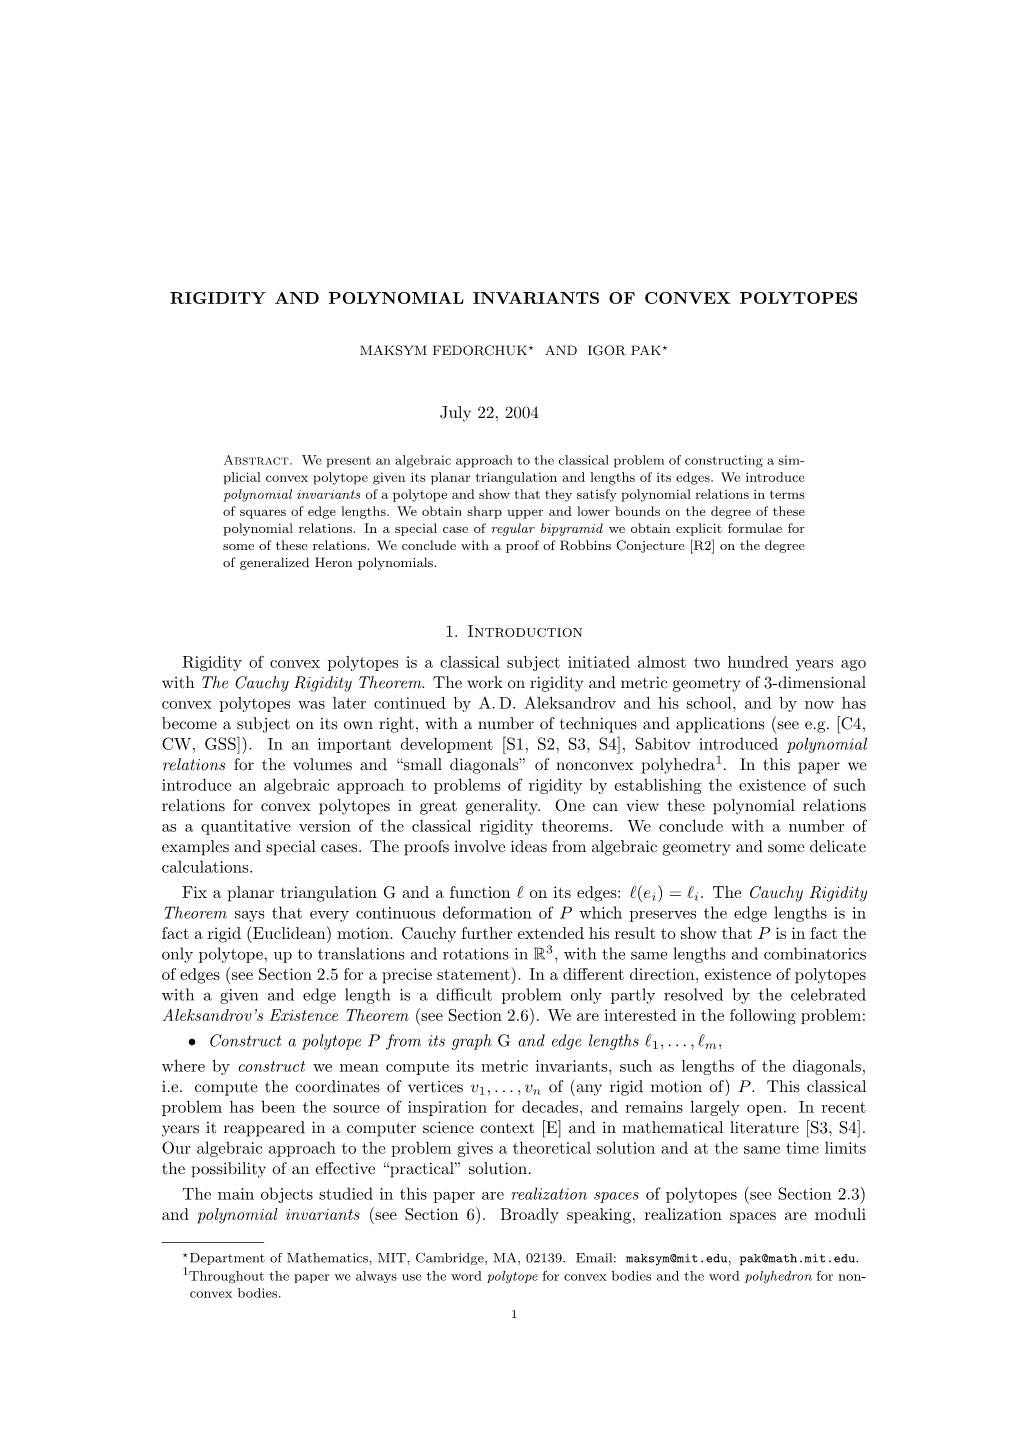 Rigidity and Polynomial Invariants of Convex Polytopes